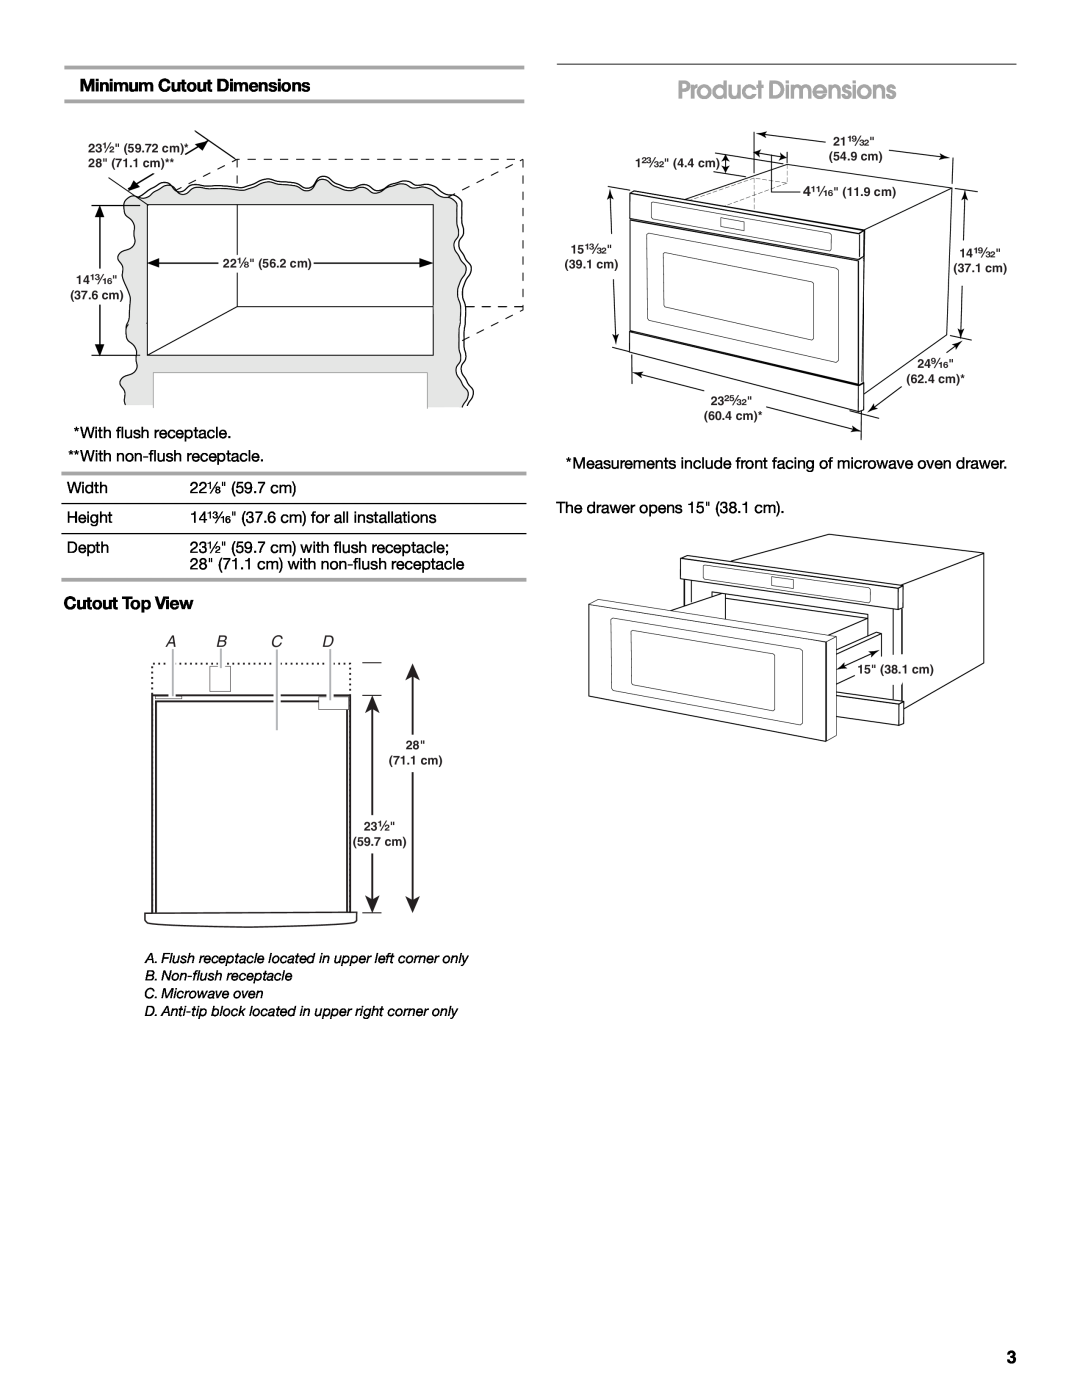 Whirlpool W10531851A installation instructions Product Dimensions, Minimum Cutout Dimensions, Cutout Top View 